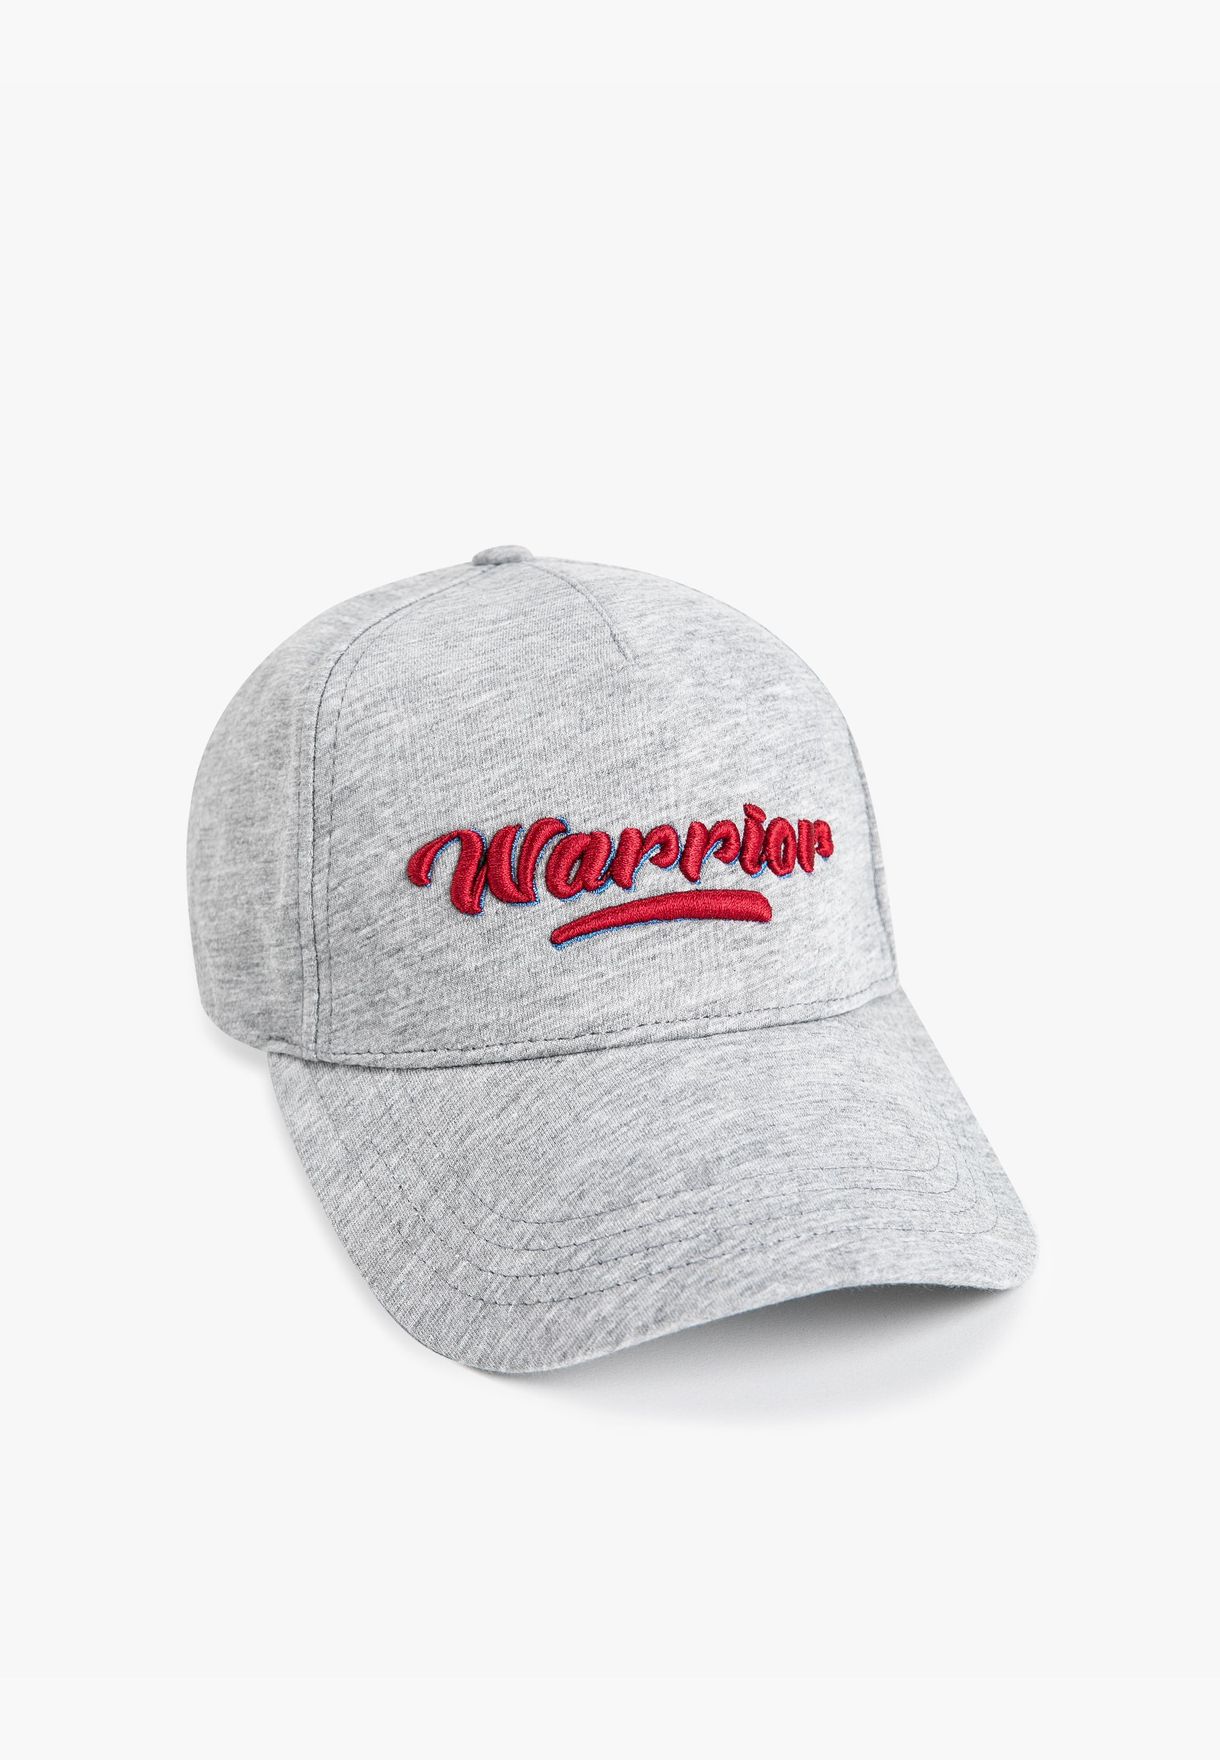 Embroidered Cap Hat